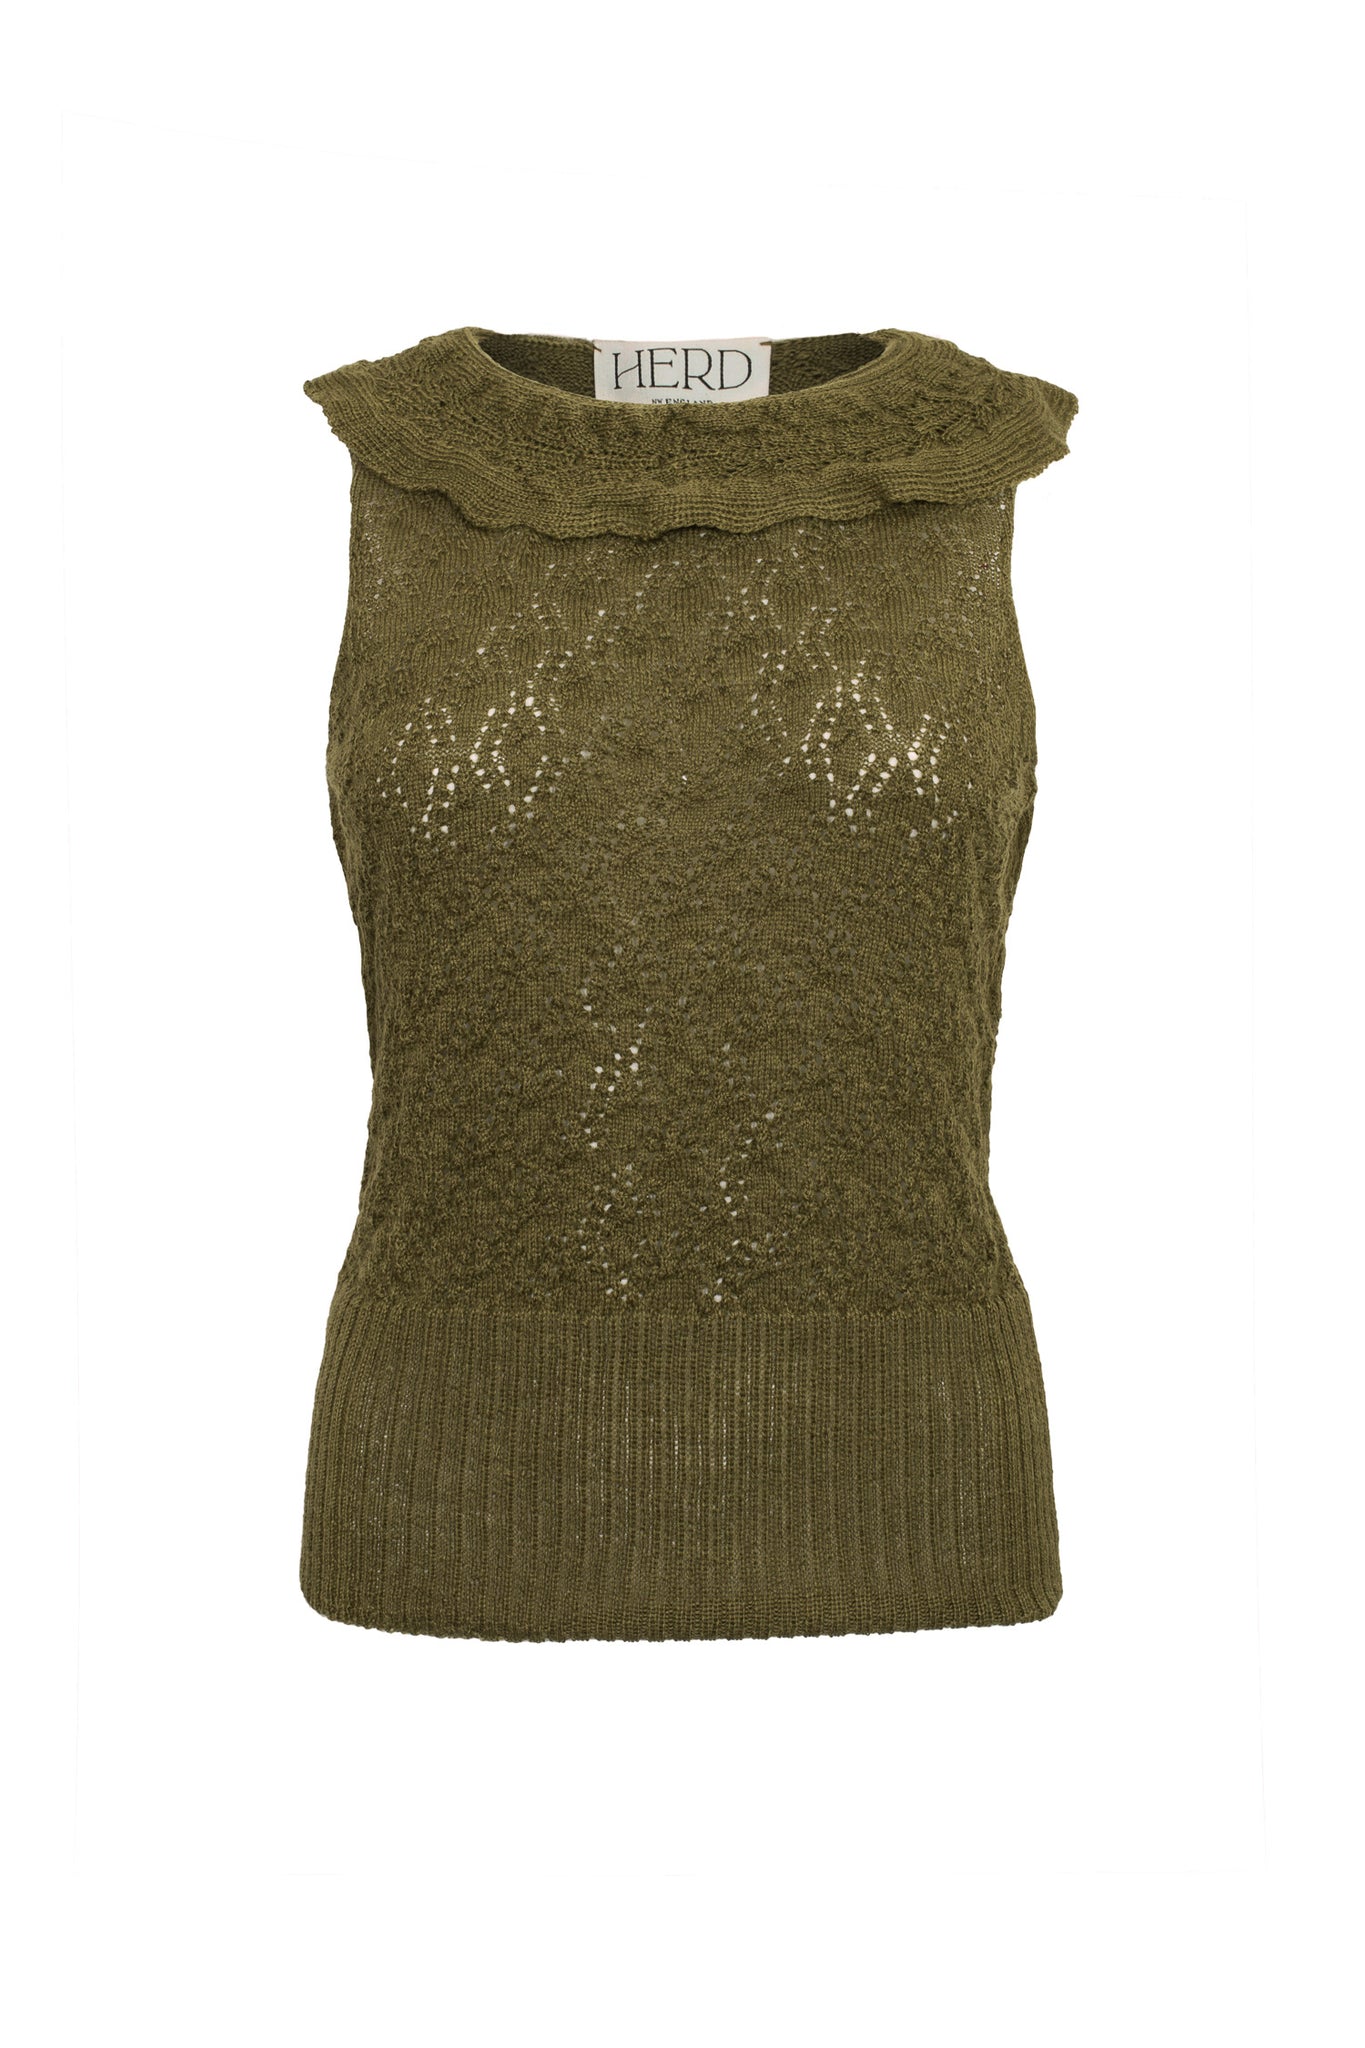 Lytham Ruffle Vest in Forest